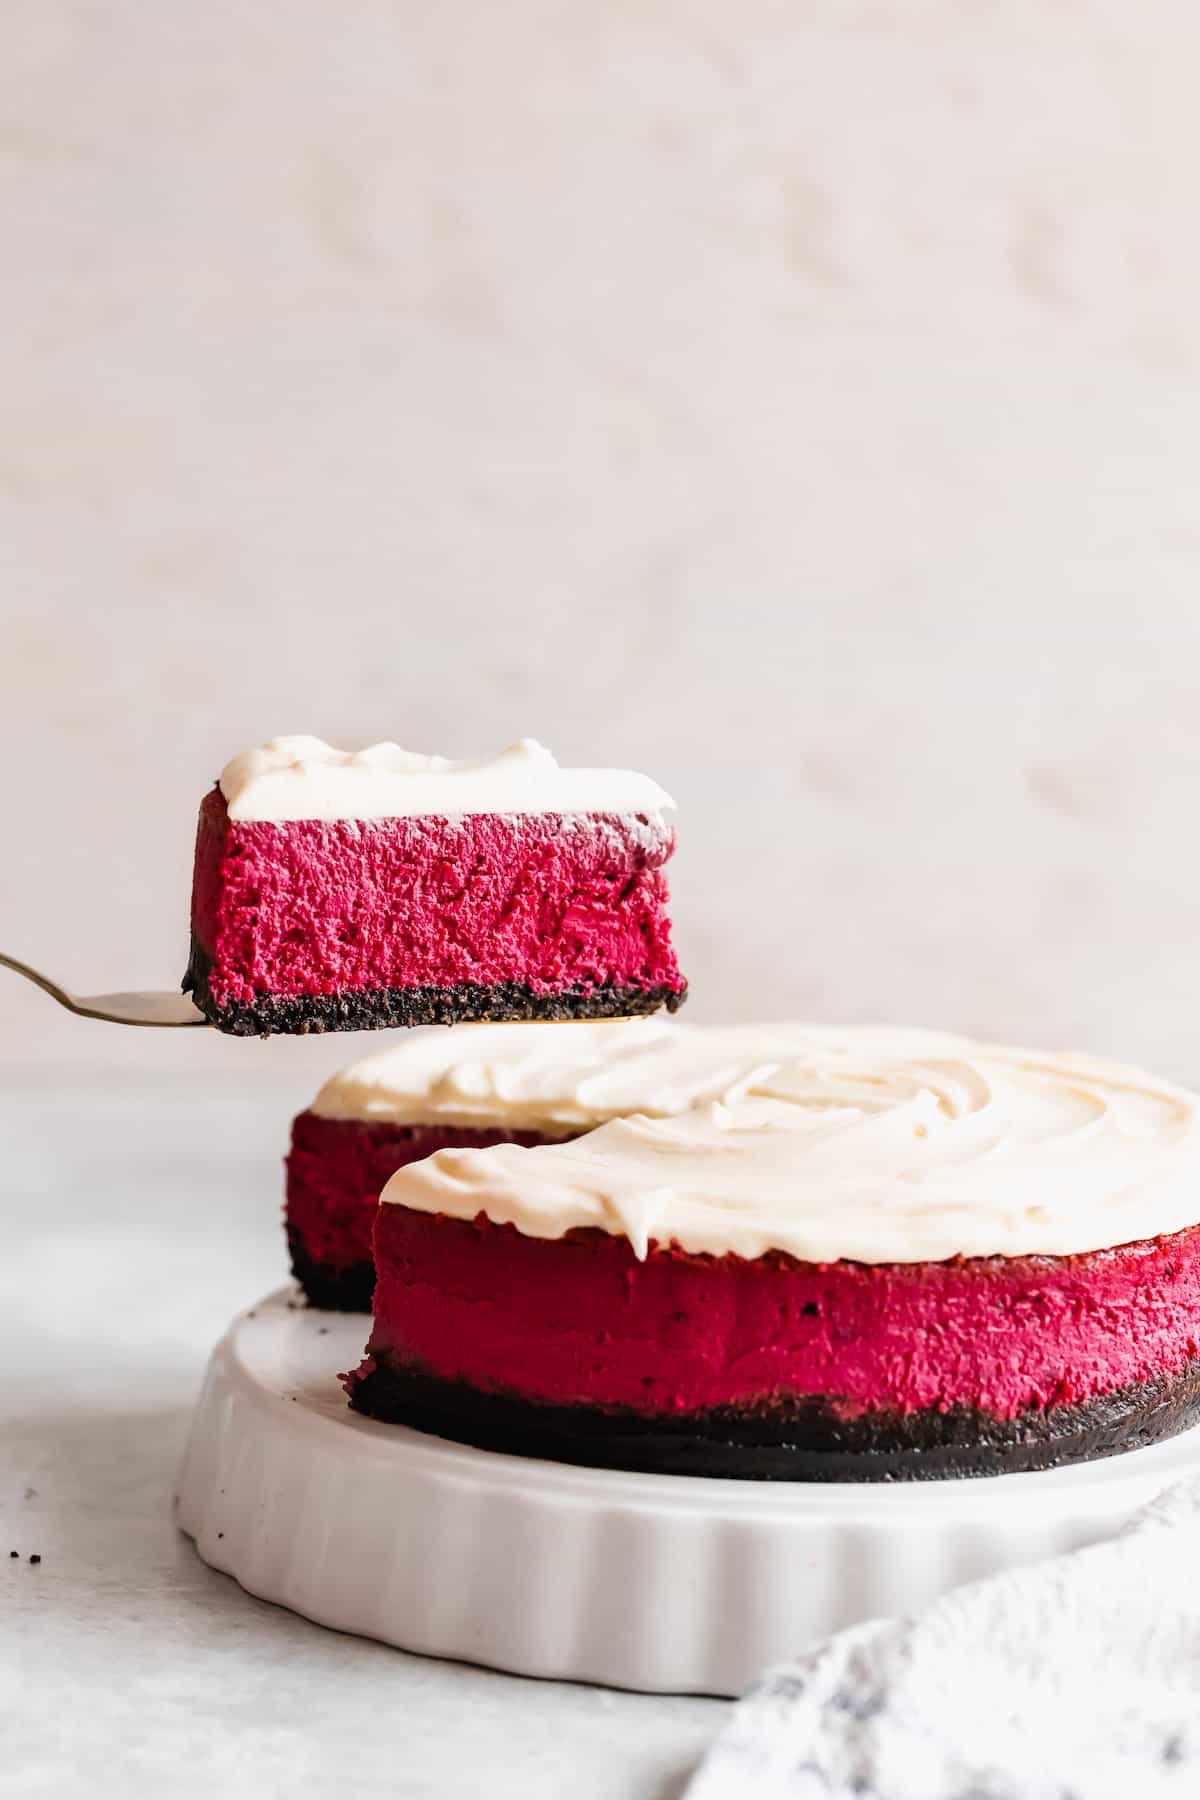 Red Velvet Cheesecake with Oreo Crust from easyweeknightrecipes.com on foodiecrush.com